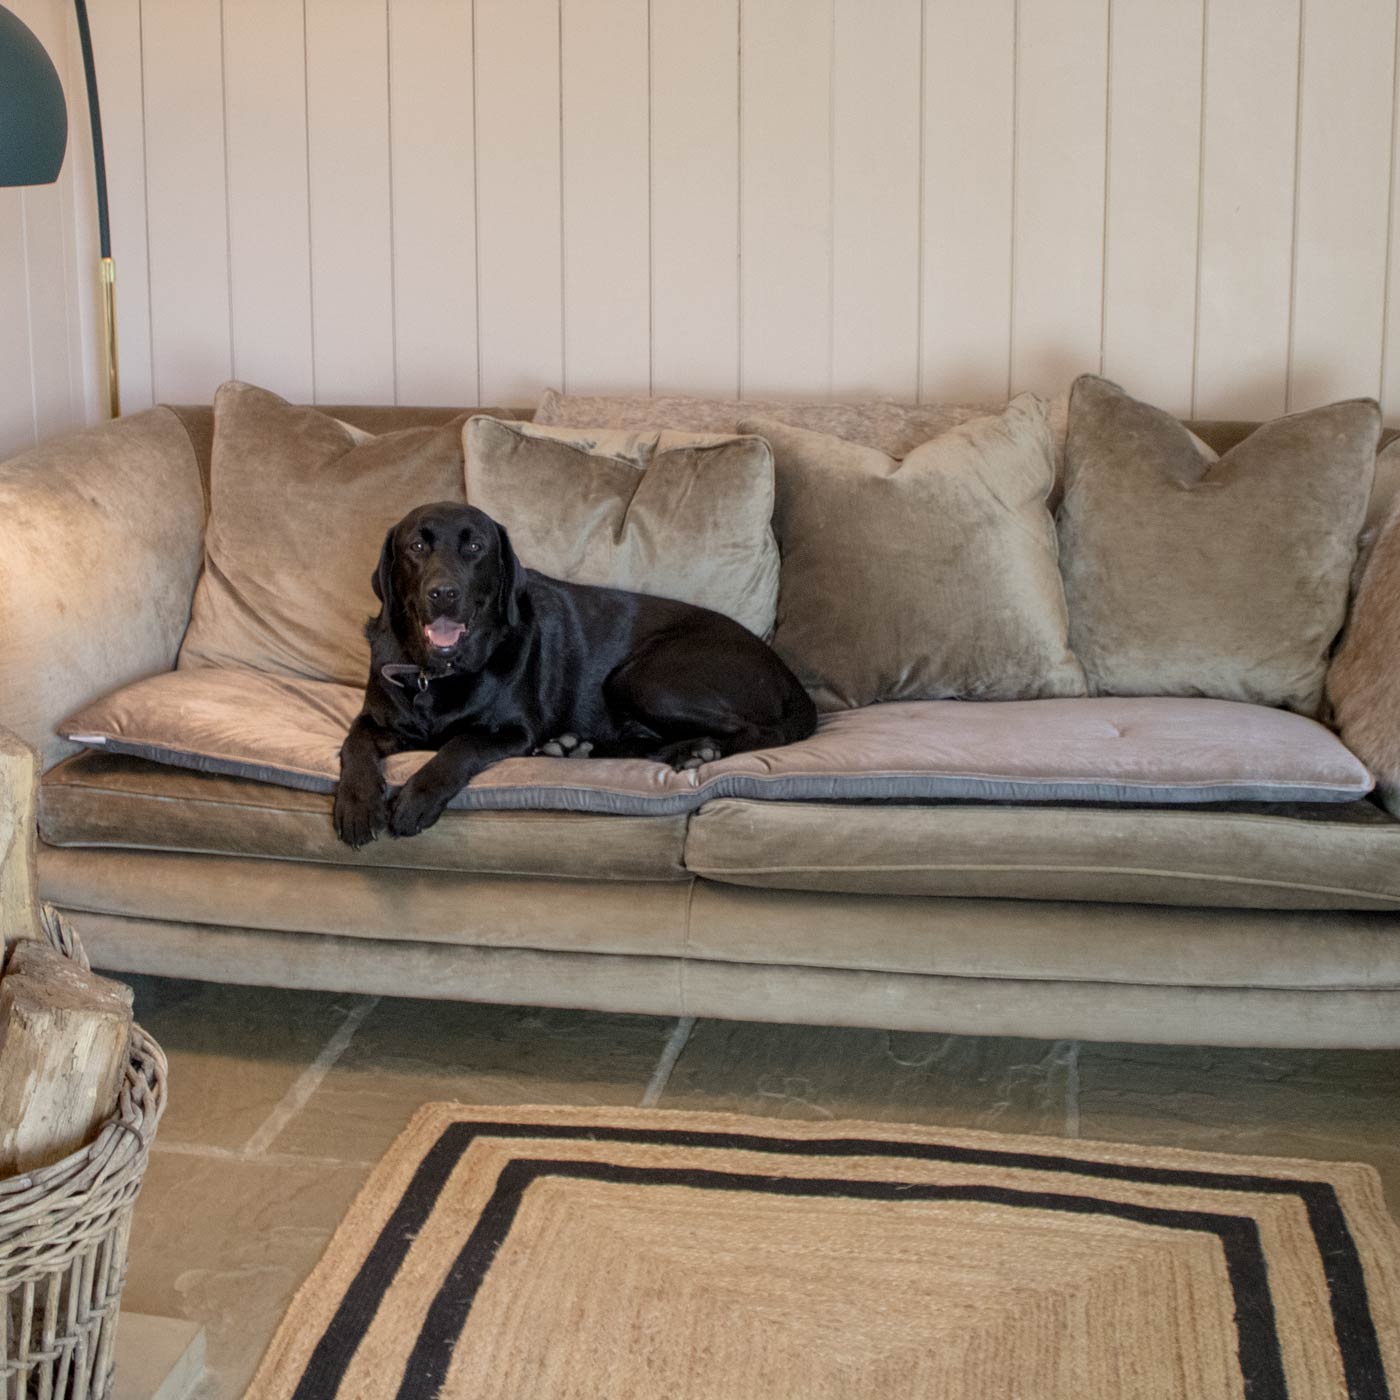 [colour:mink velvet] Discover Our Luxury Velvet sofa Topper, The Perfect Pet sofa Accessory In Stunning Mink Velvet! Available Now at Lords & Labradors